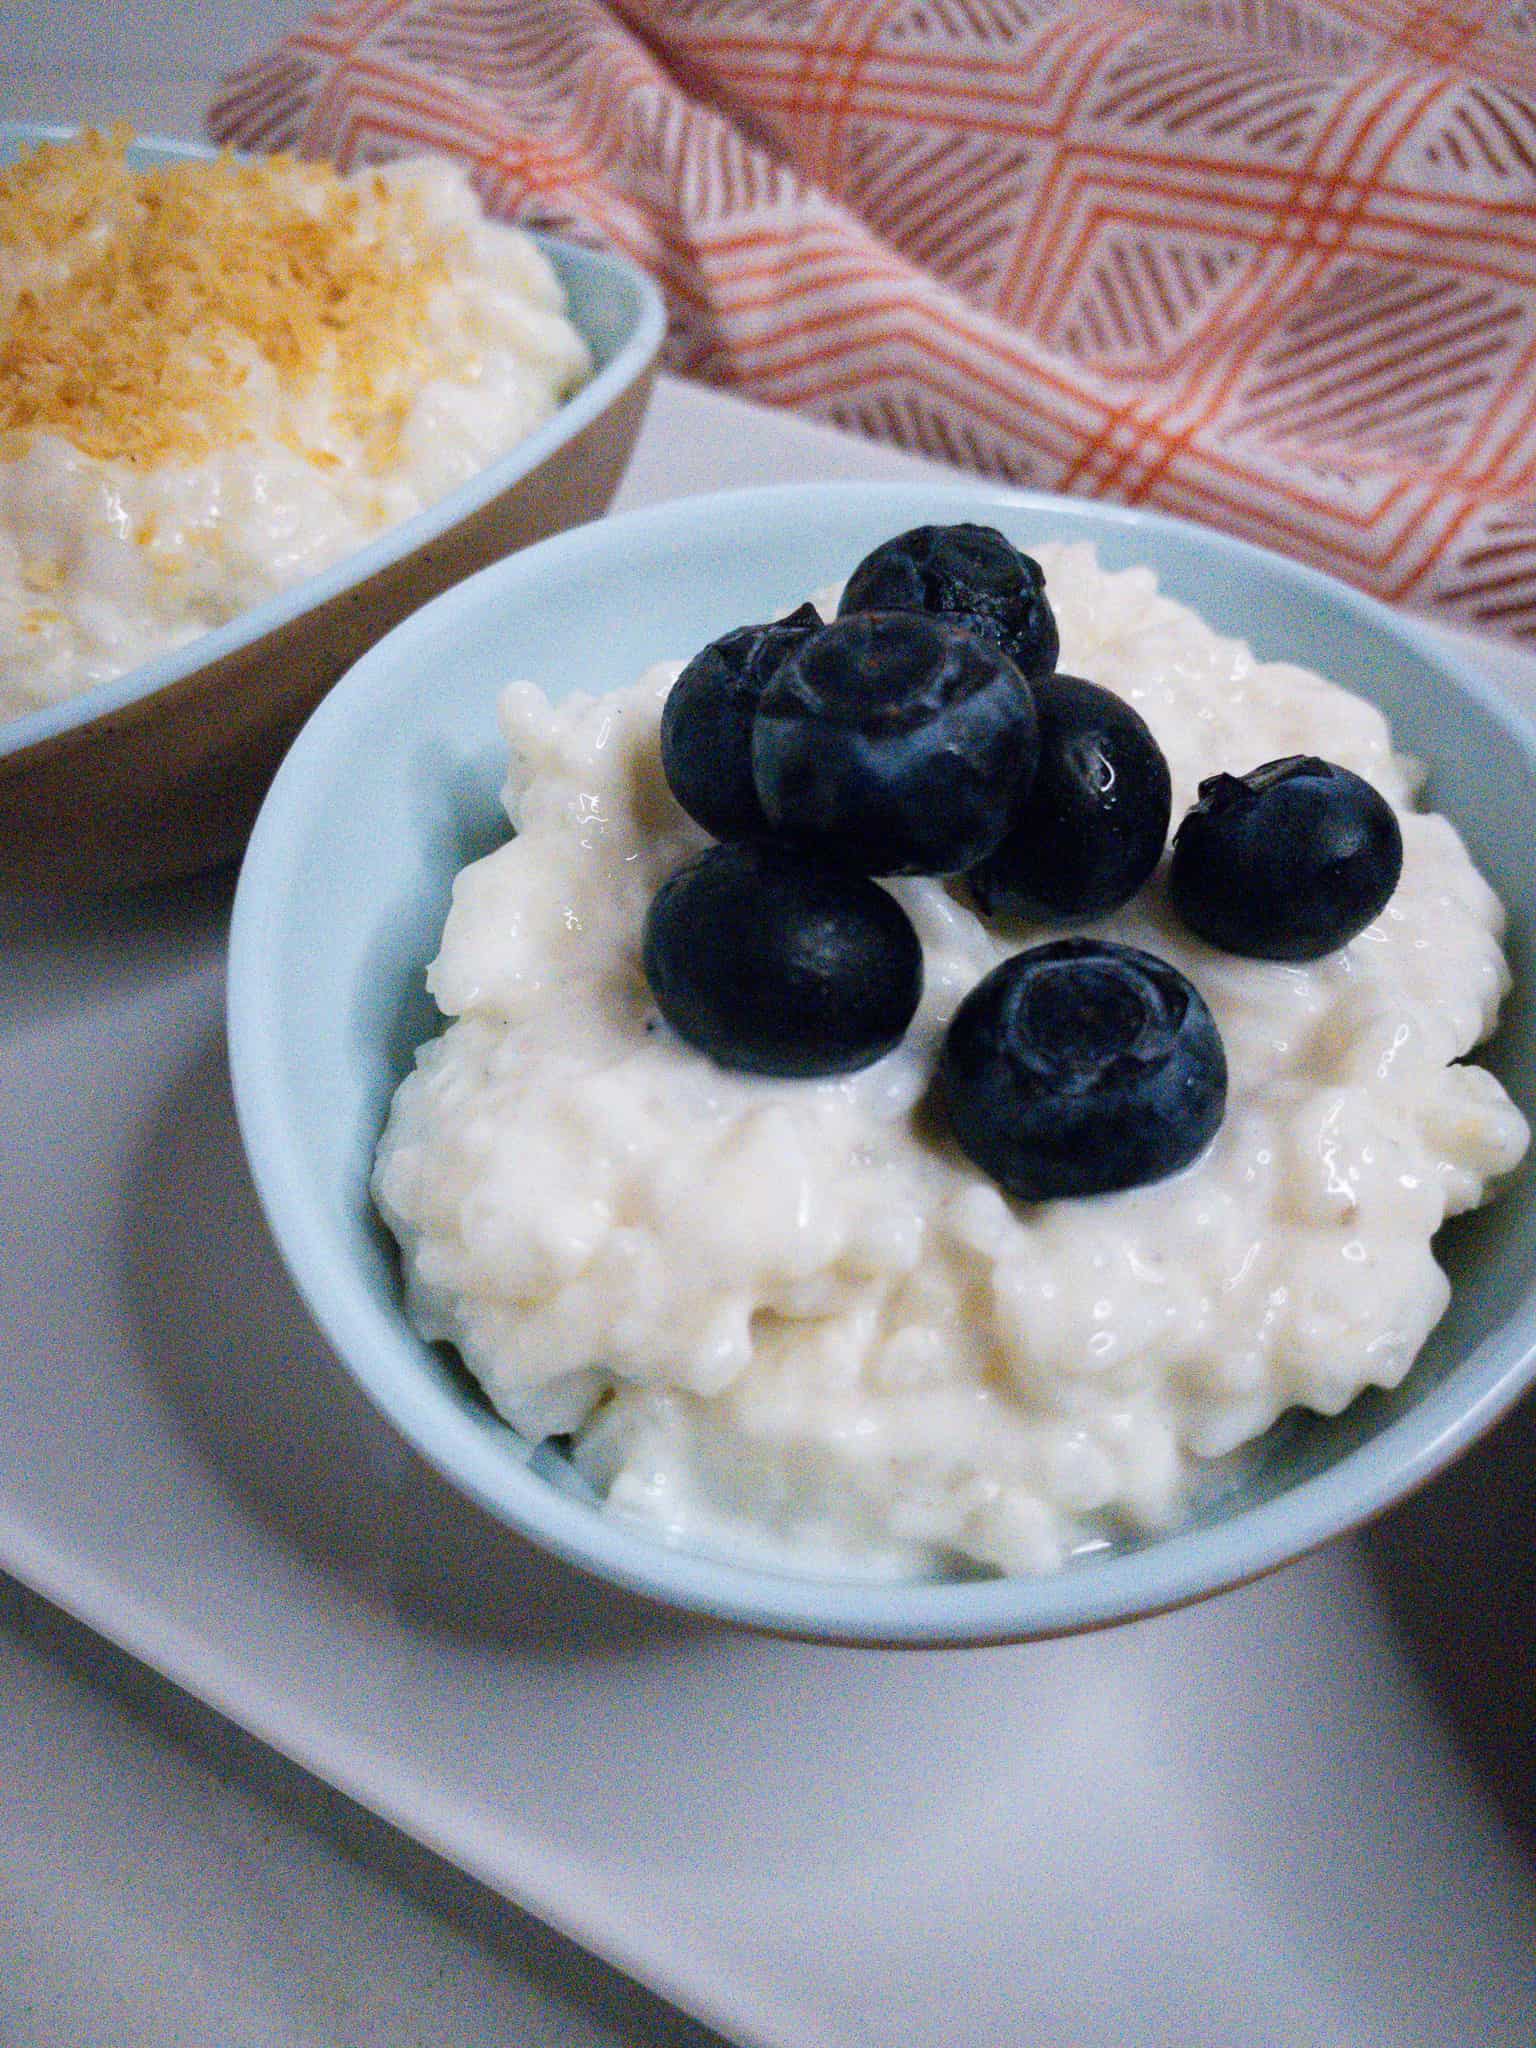 Coconut Rice Pudding with blueberries